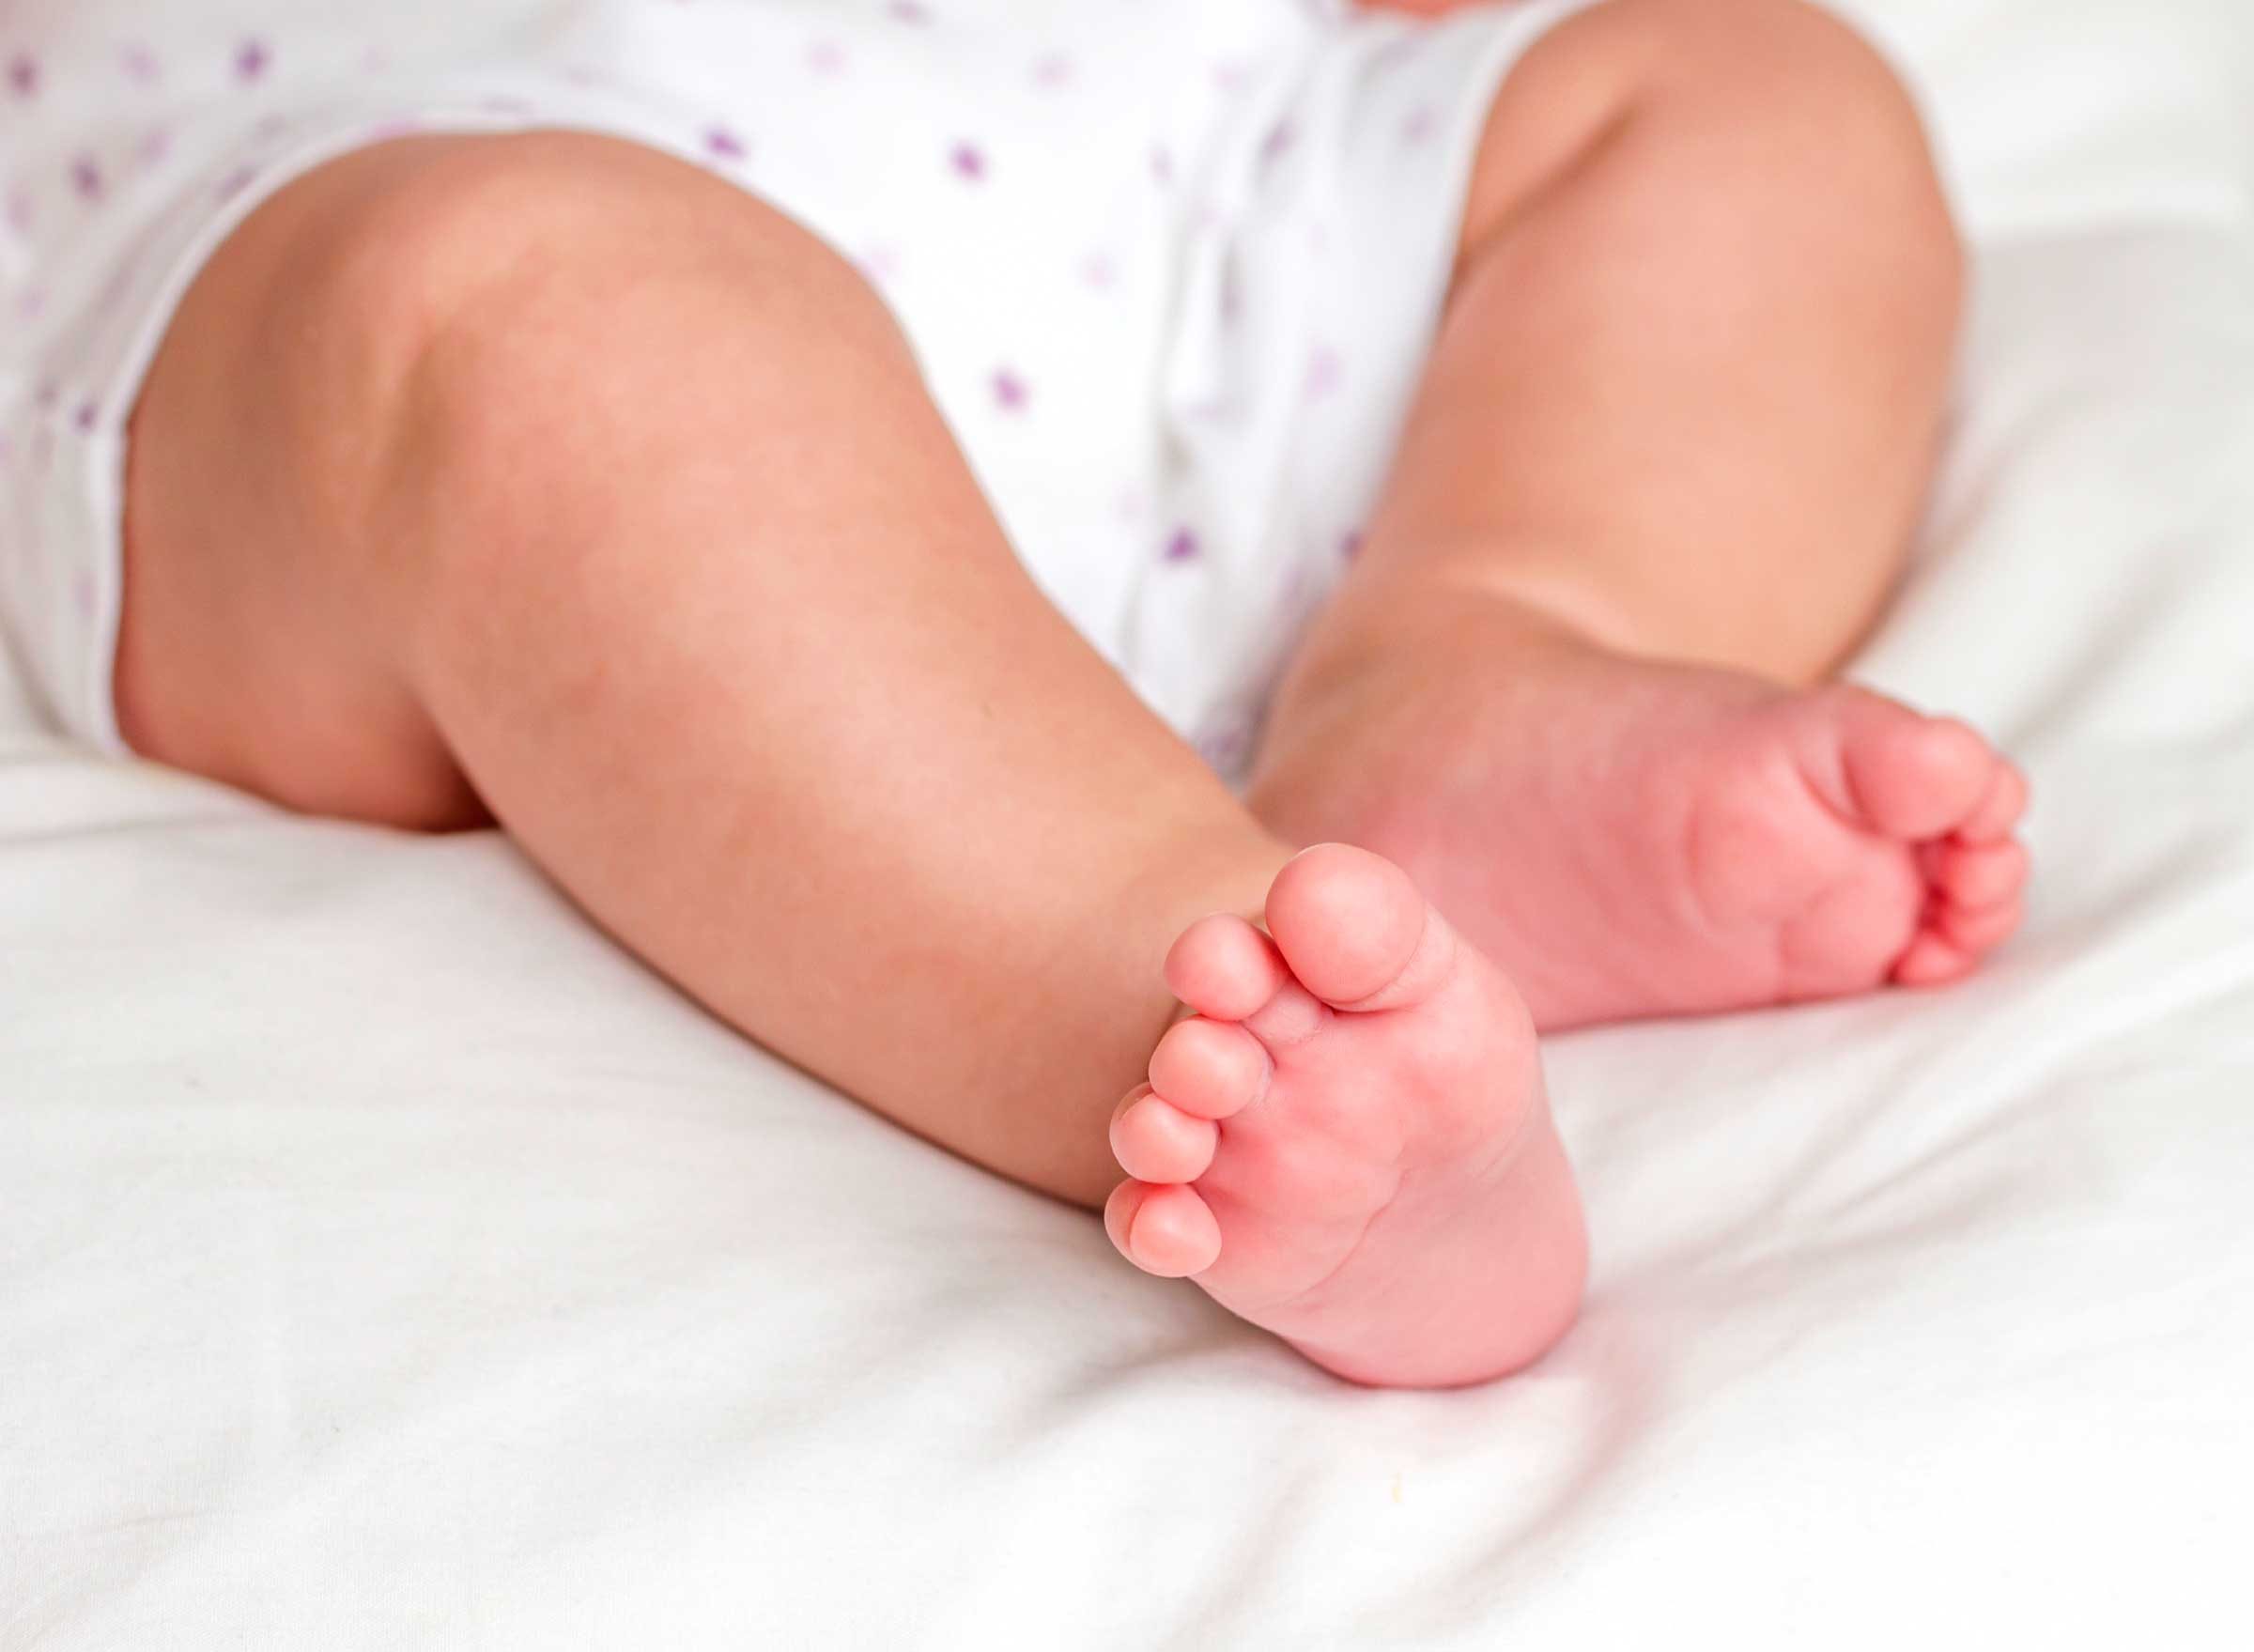 When Does A Baby Develop Kneecaps?